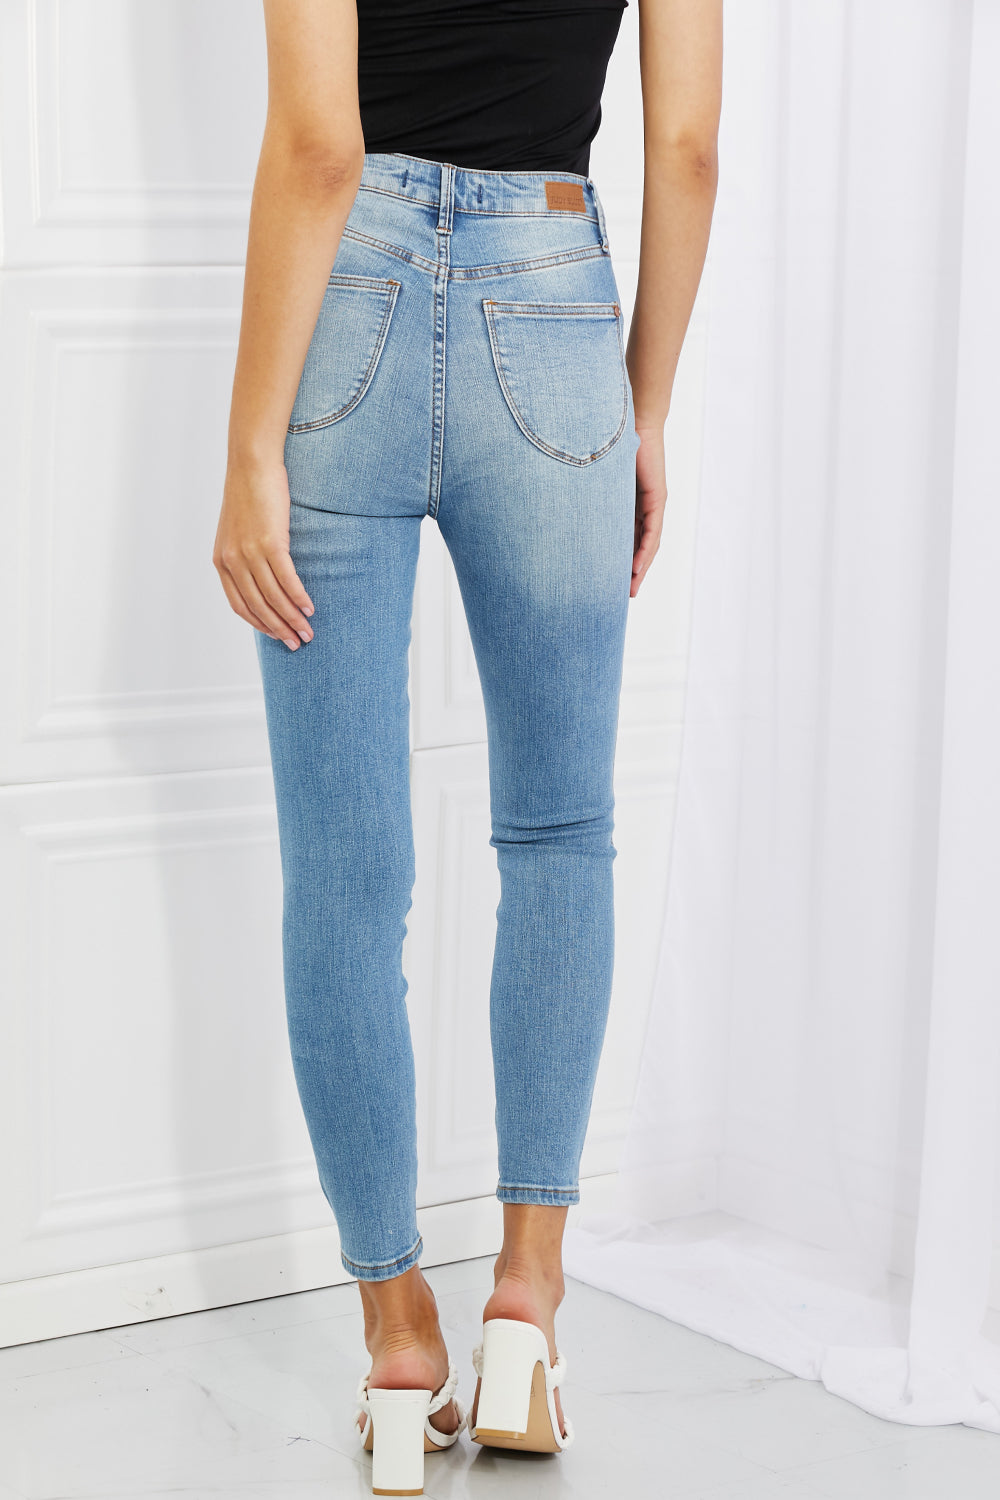 Style #: 88538 High Waist Skinny Jeans Light Wash Judy Blue Womens Misses Juniors Stretchy Jeans Denim